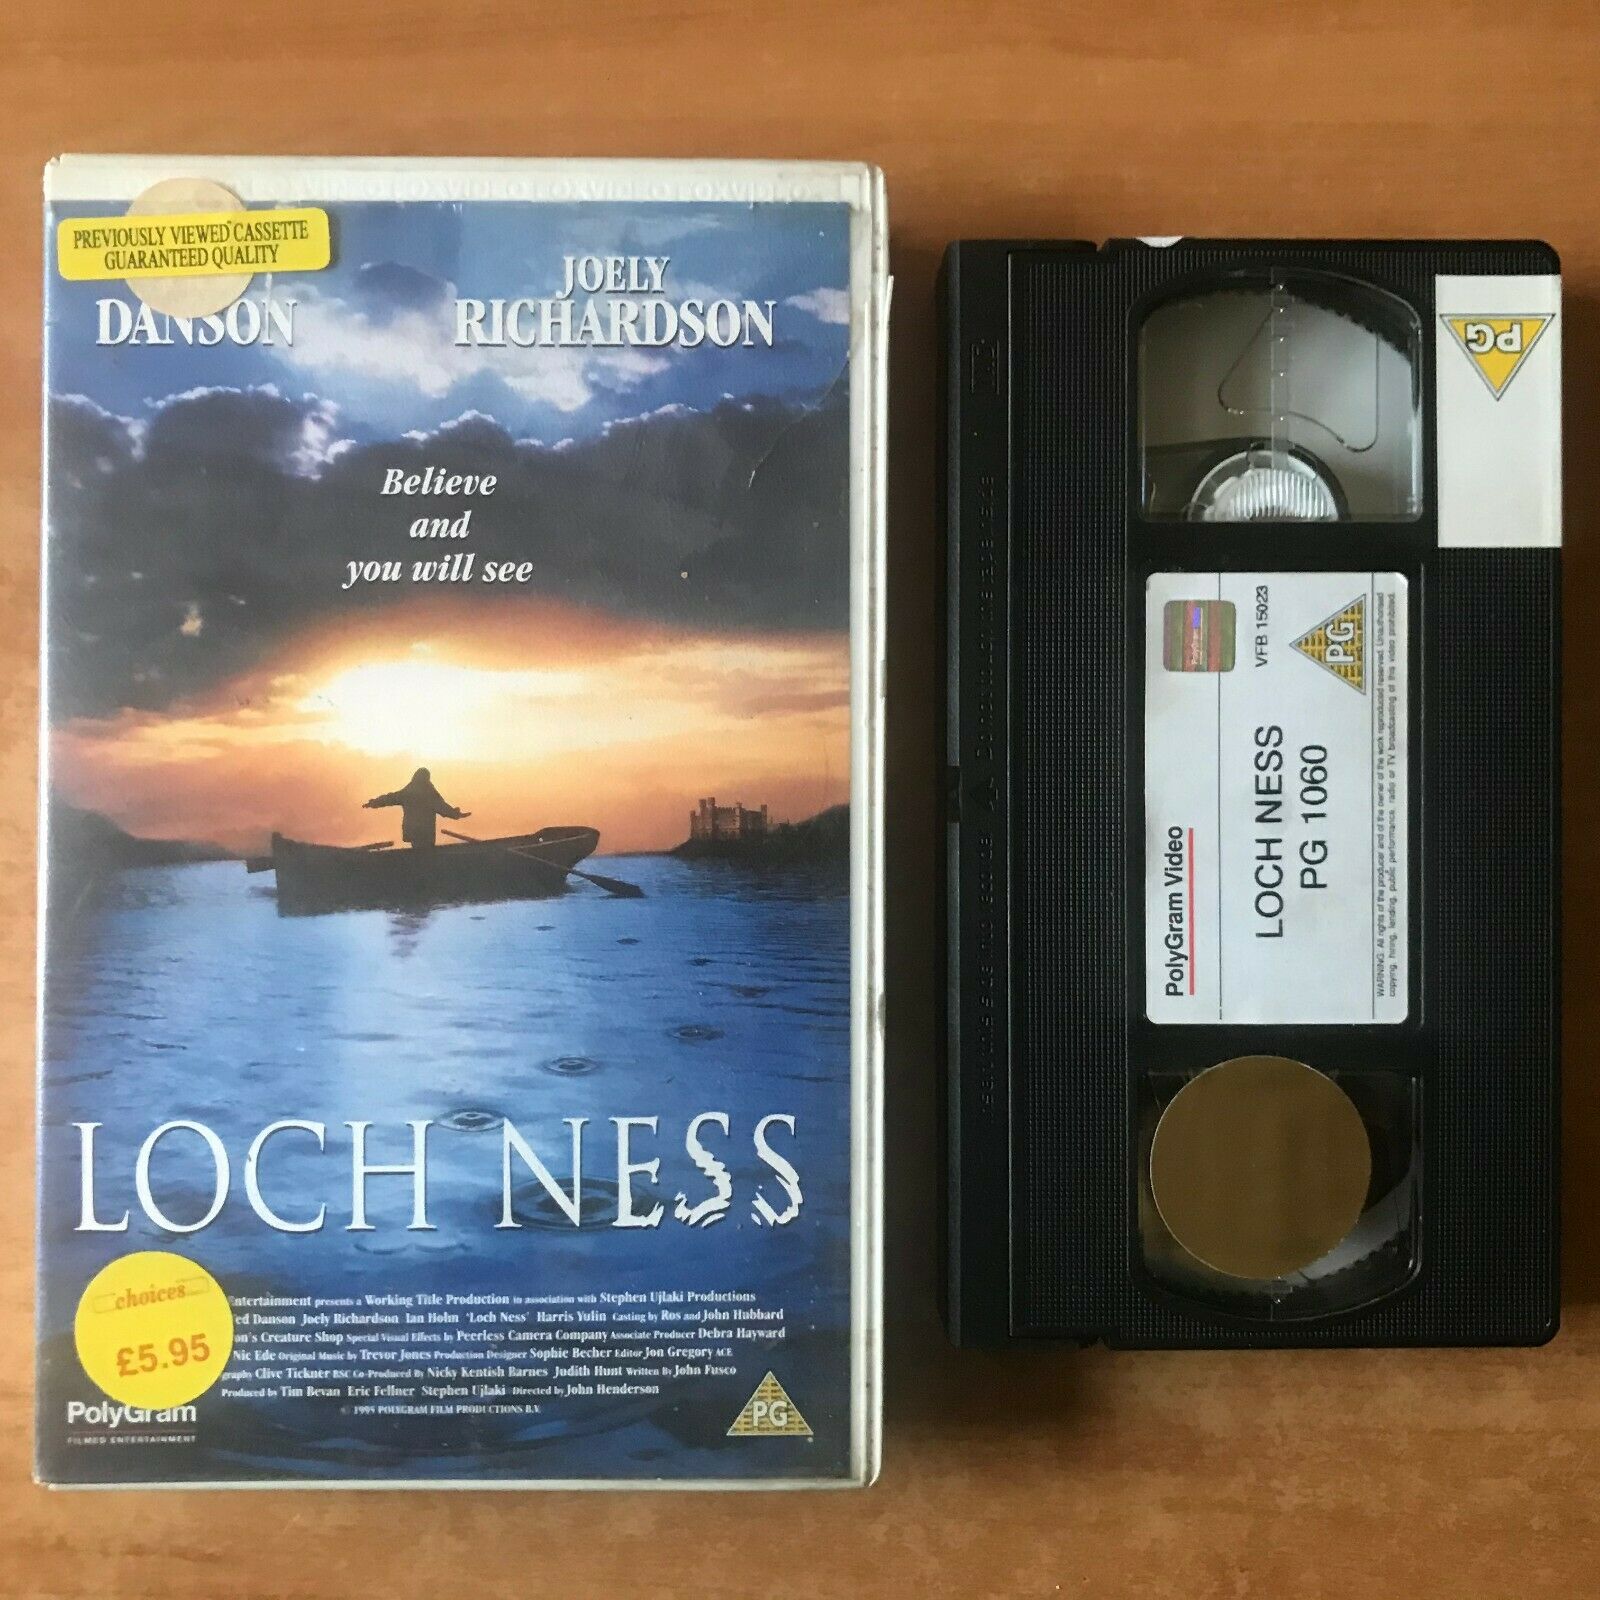 Loch Ness (1997): Family Drama [Iconic Creature] Large Box - Ted Danson - VHS-